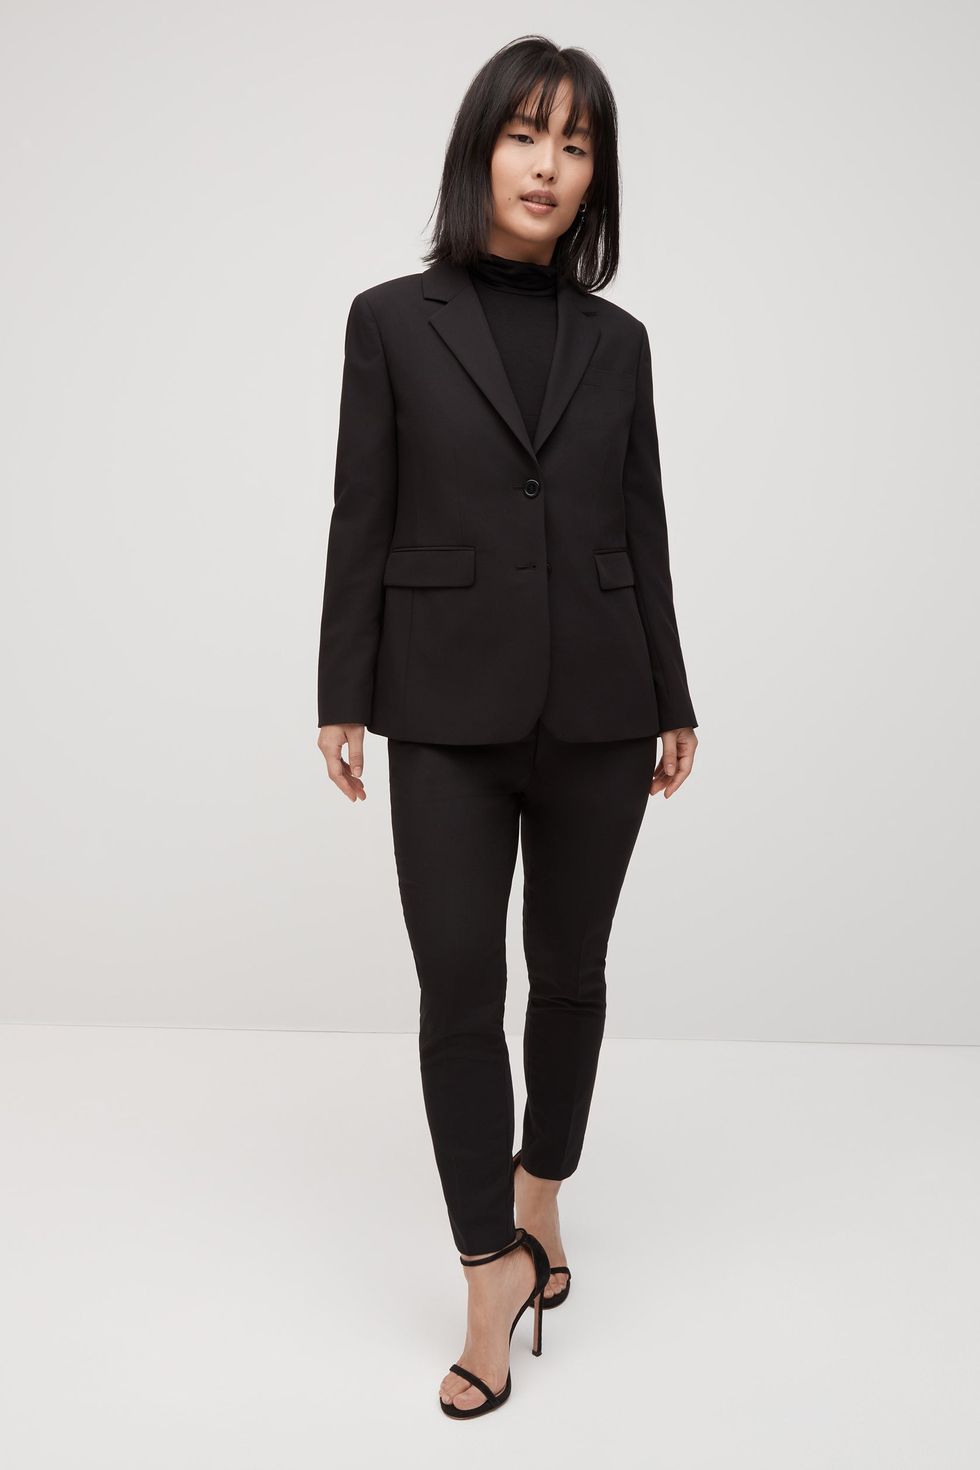 Discover The Best Womens Suit design & Power Suits For Women